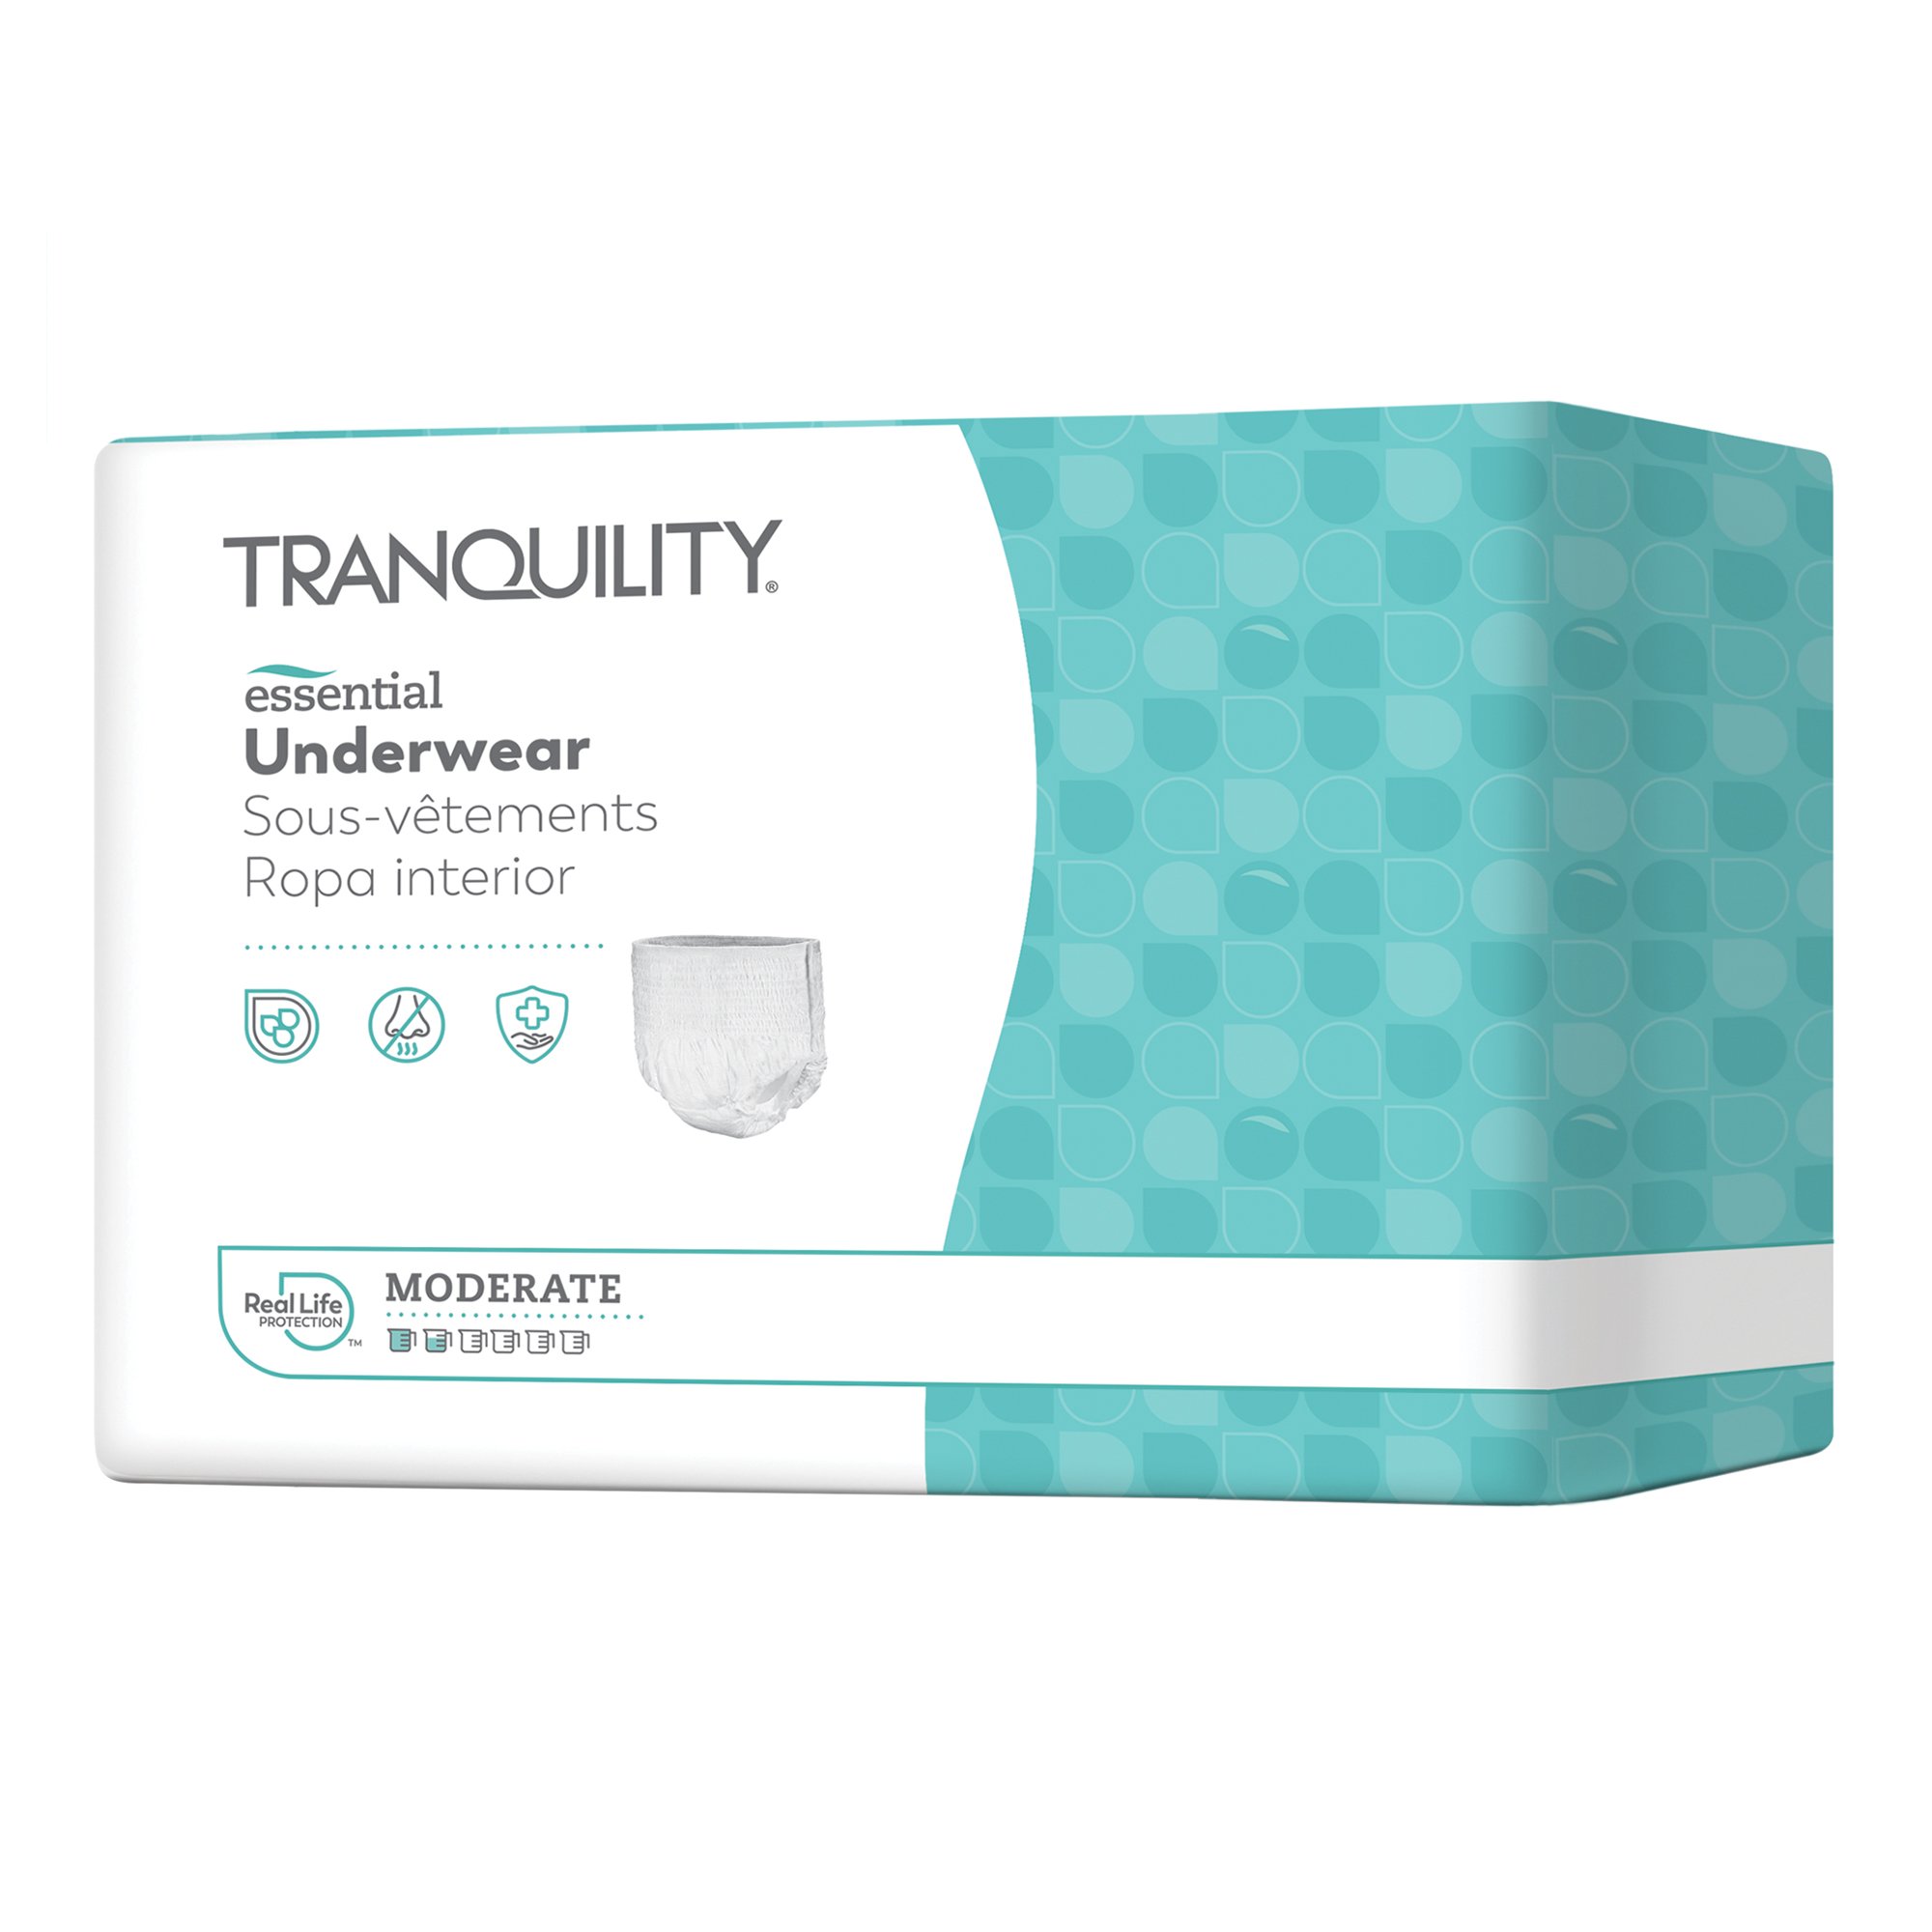 Tranquility essential Protective Underwear